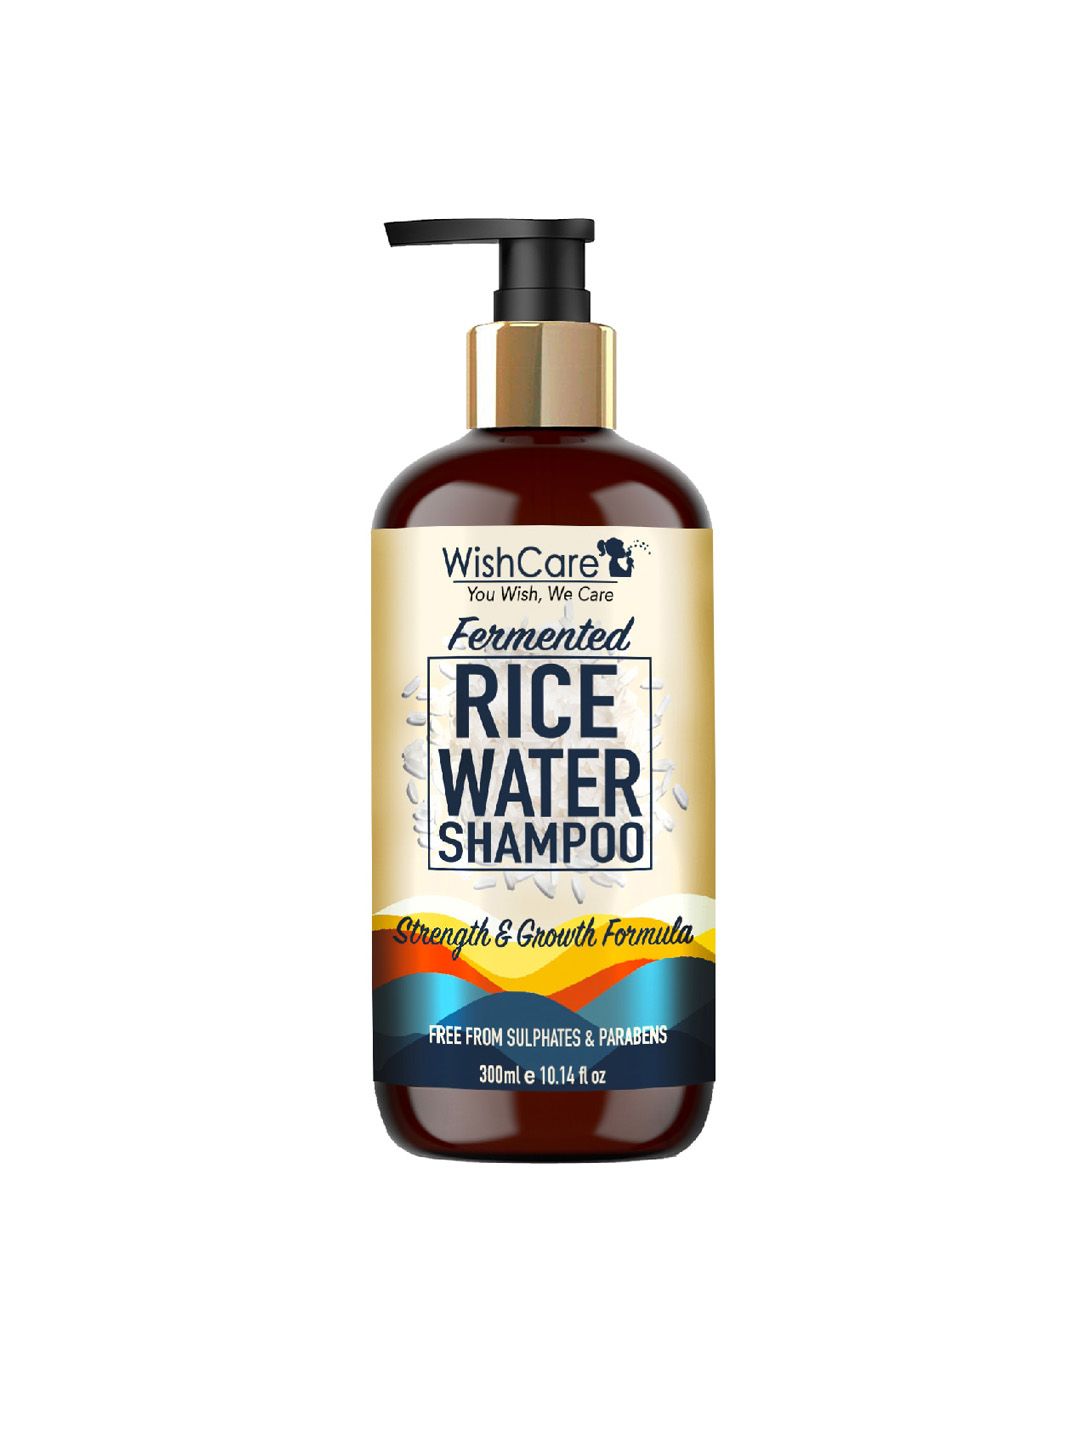 WishCare Fermented Rice Water Shampoo 300 ml Price in India